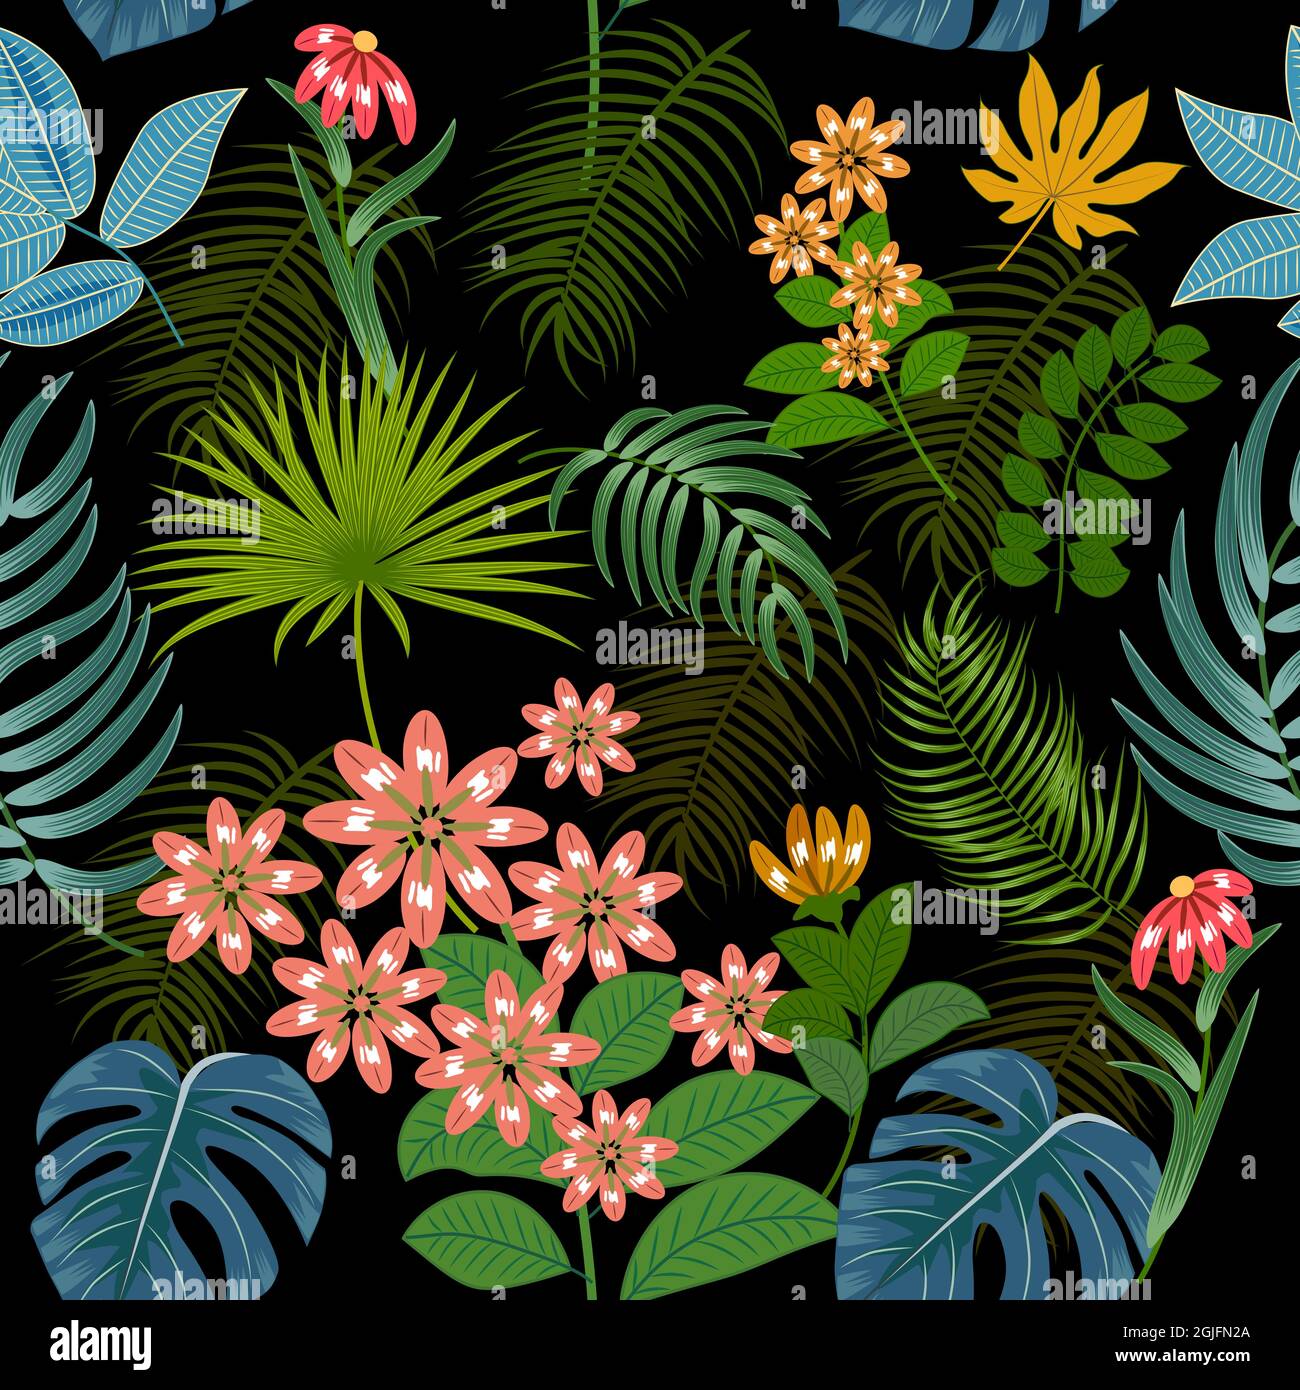 Seamless pattern with bright flowers and tropical leaves of palm tree on dark background. Botany vector background, jungle wallpaper. Stock Vector